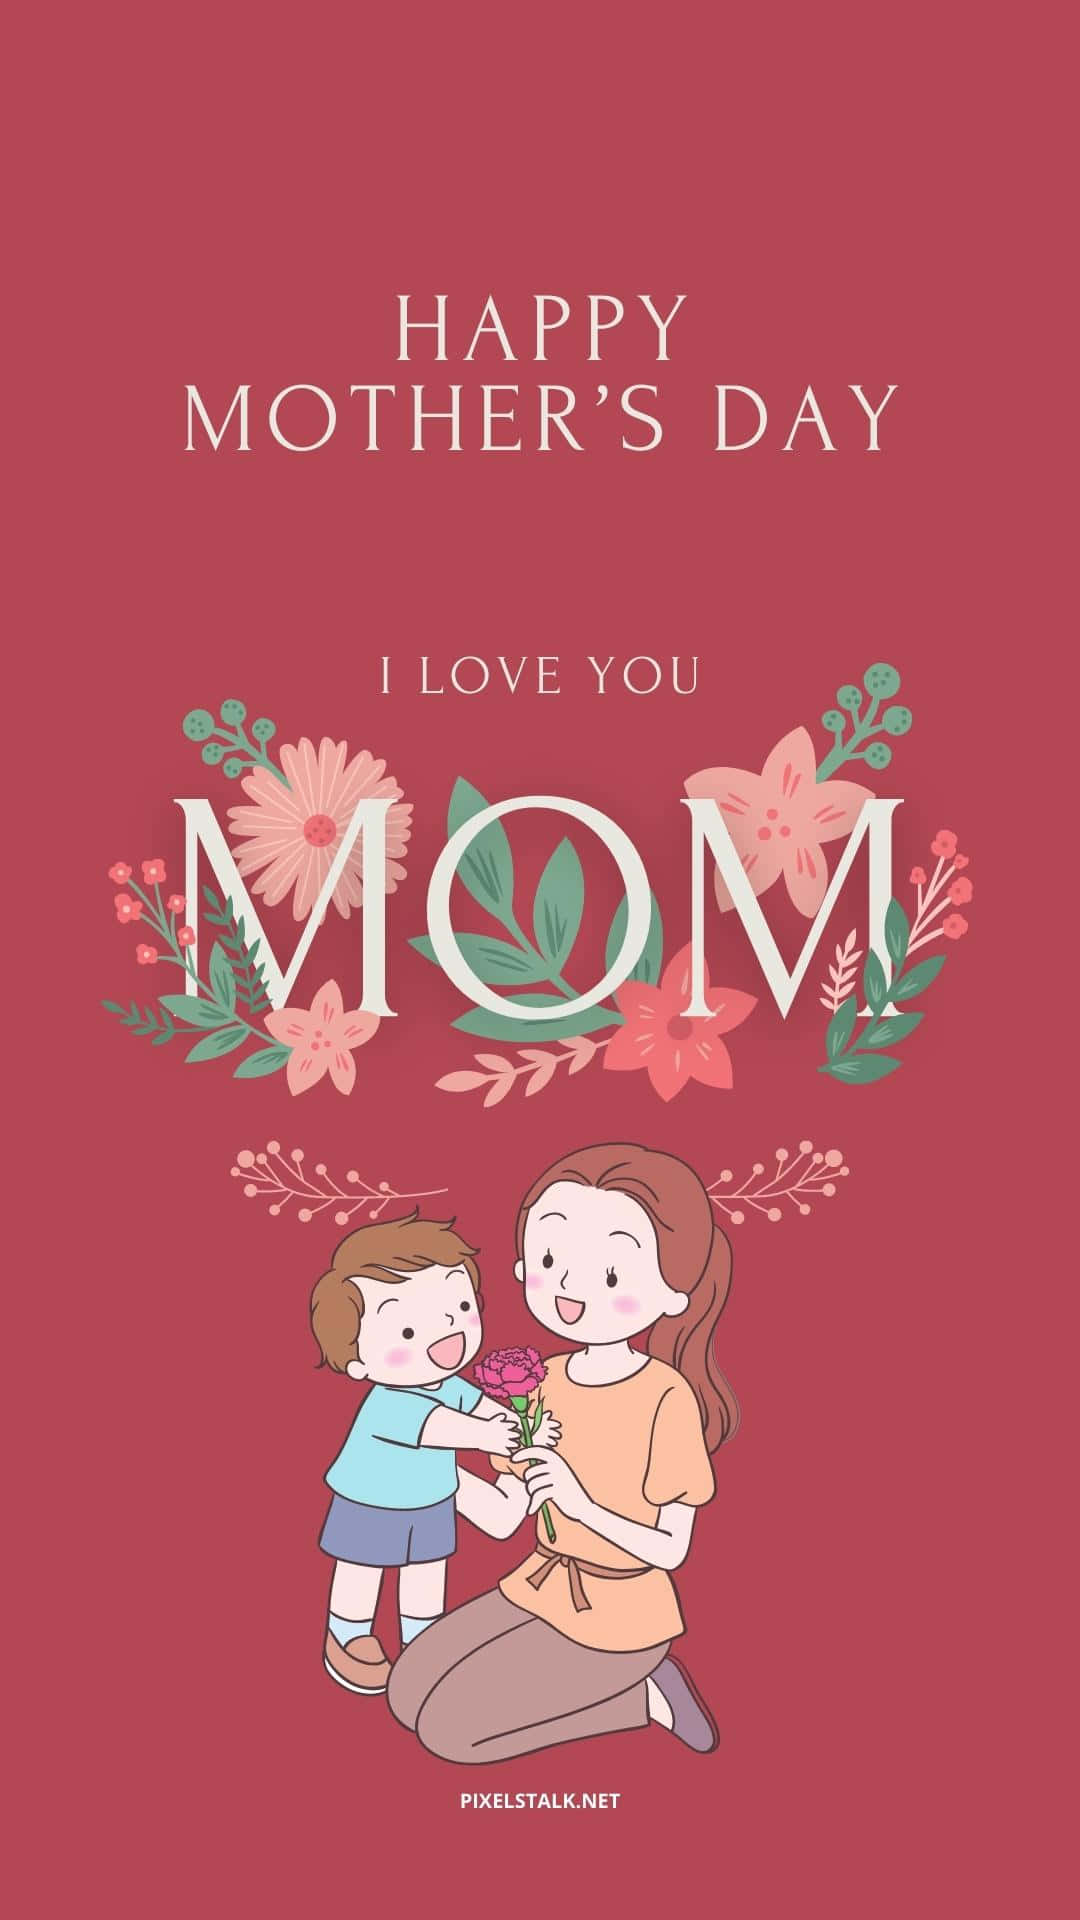 Celebrate Your Moms This Year With A Beautiful Happy Mothers Day Hd Wallpaper!